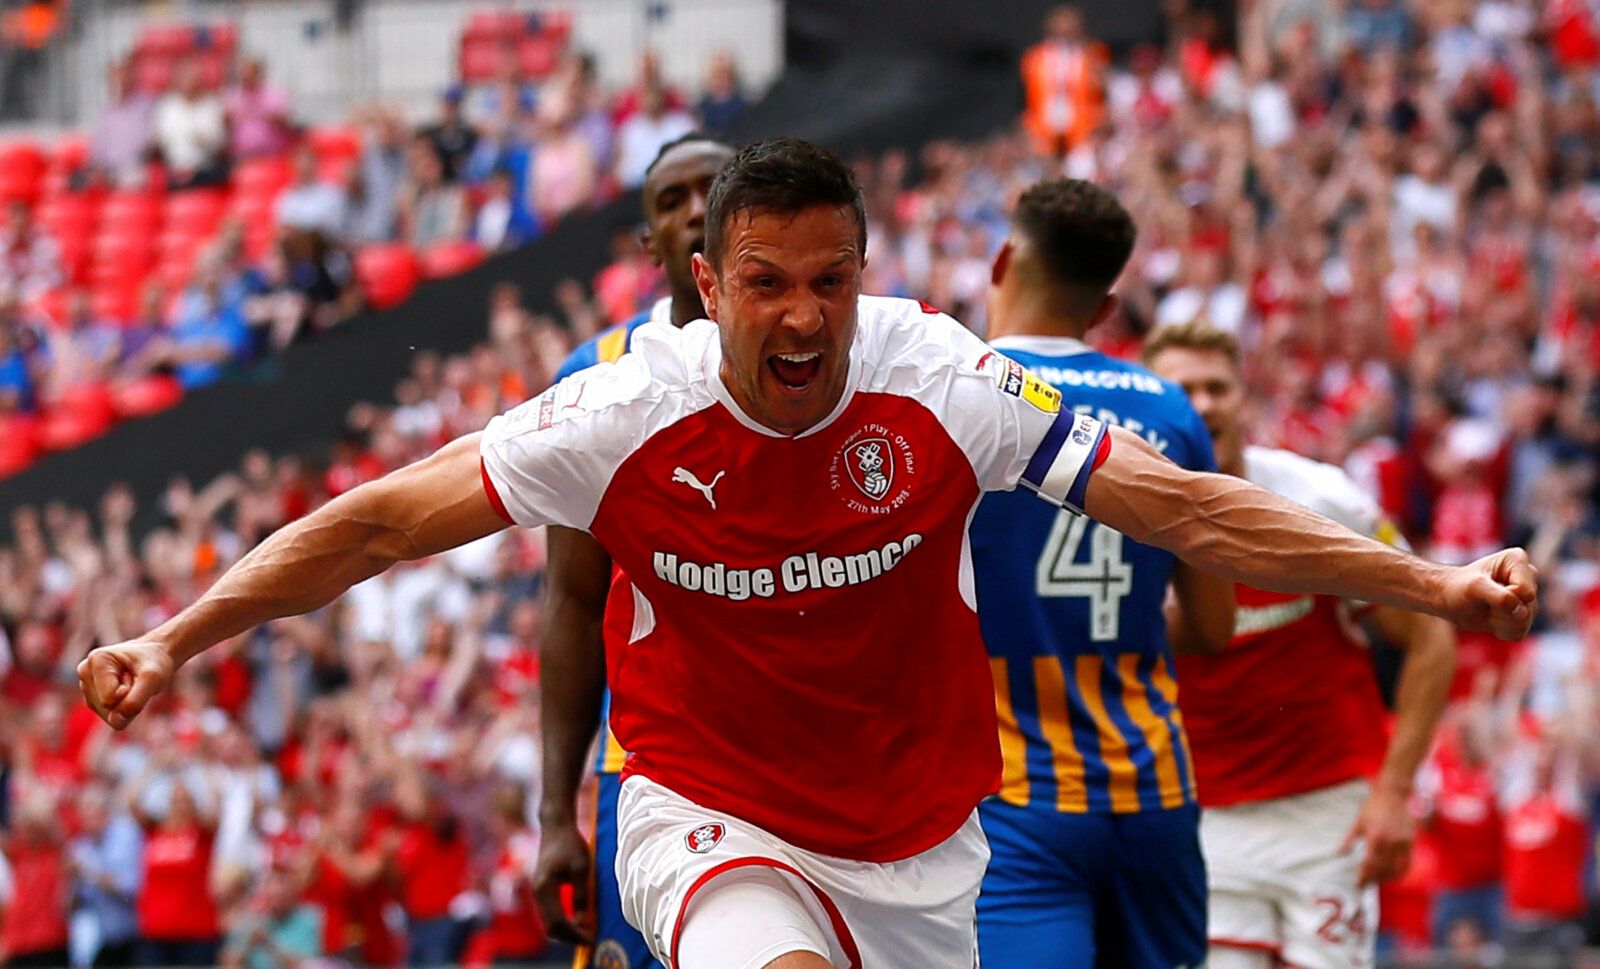 Soccer Football - League One Play-Off Final - Rotherham United v Shrewsbury Town - Wembley Stadium, London, Britain - May 27, 2018   Rotherham's Richard Wood celebrates scoring their first goal    Action Images/Jason Cairnduff    EDITORIAL USE ONLY. No use with unauthorized audio, video, data, fixture lists, club/league logos or 